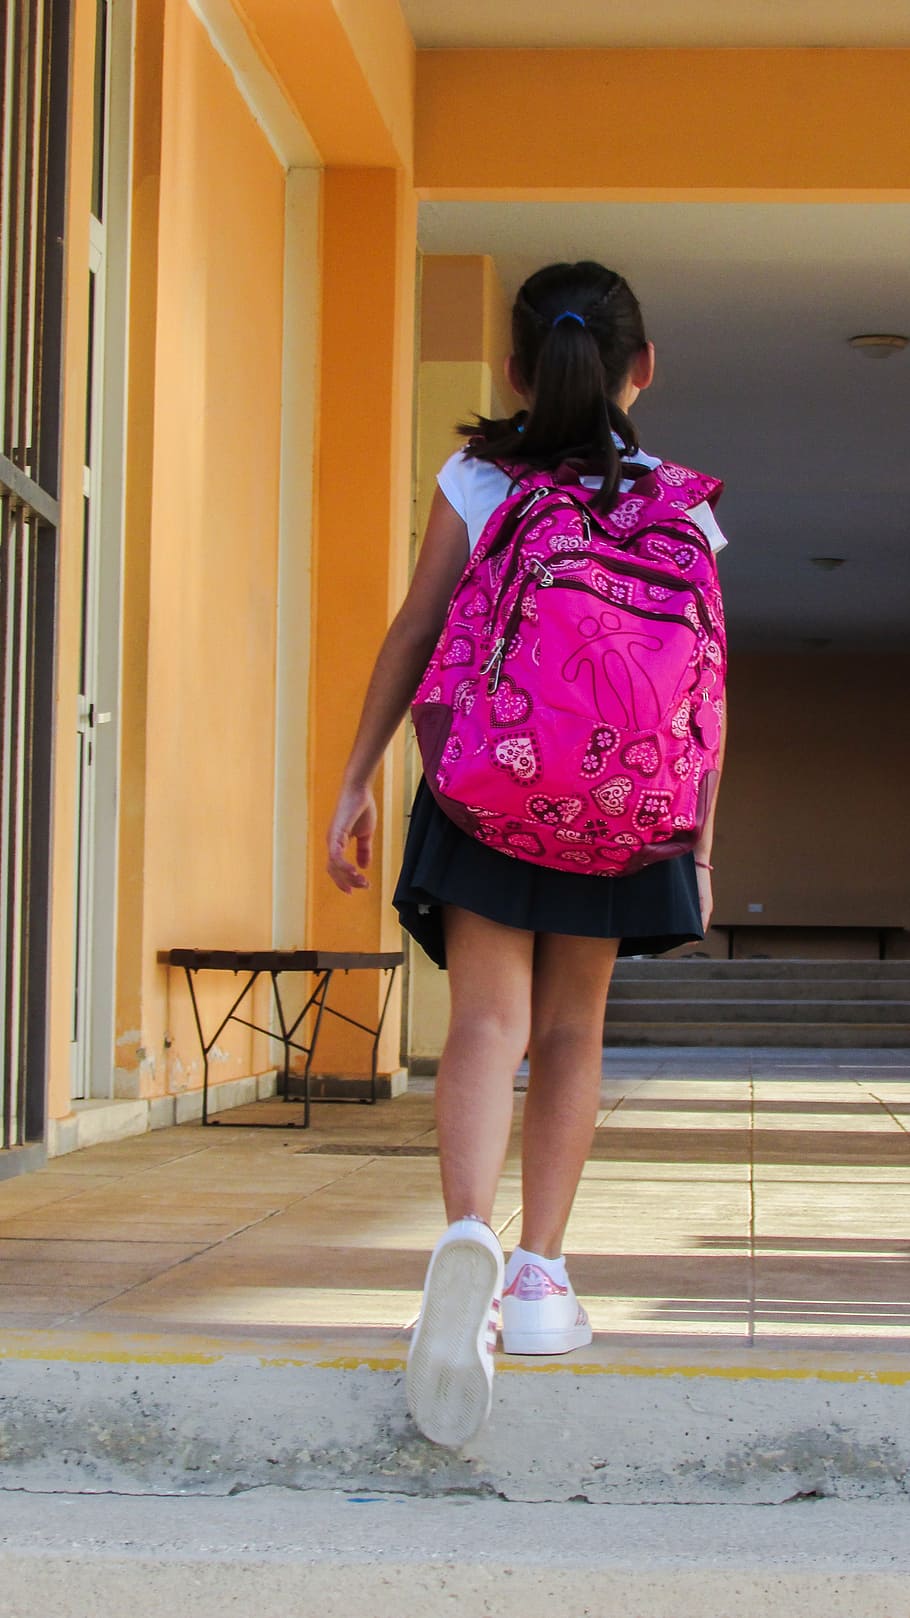 girl wearing backpack while walking on pathway, student, school